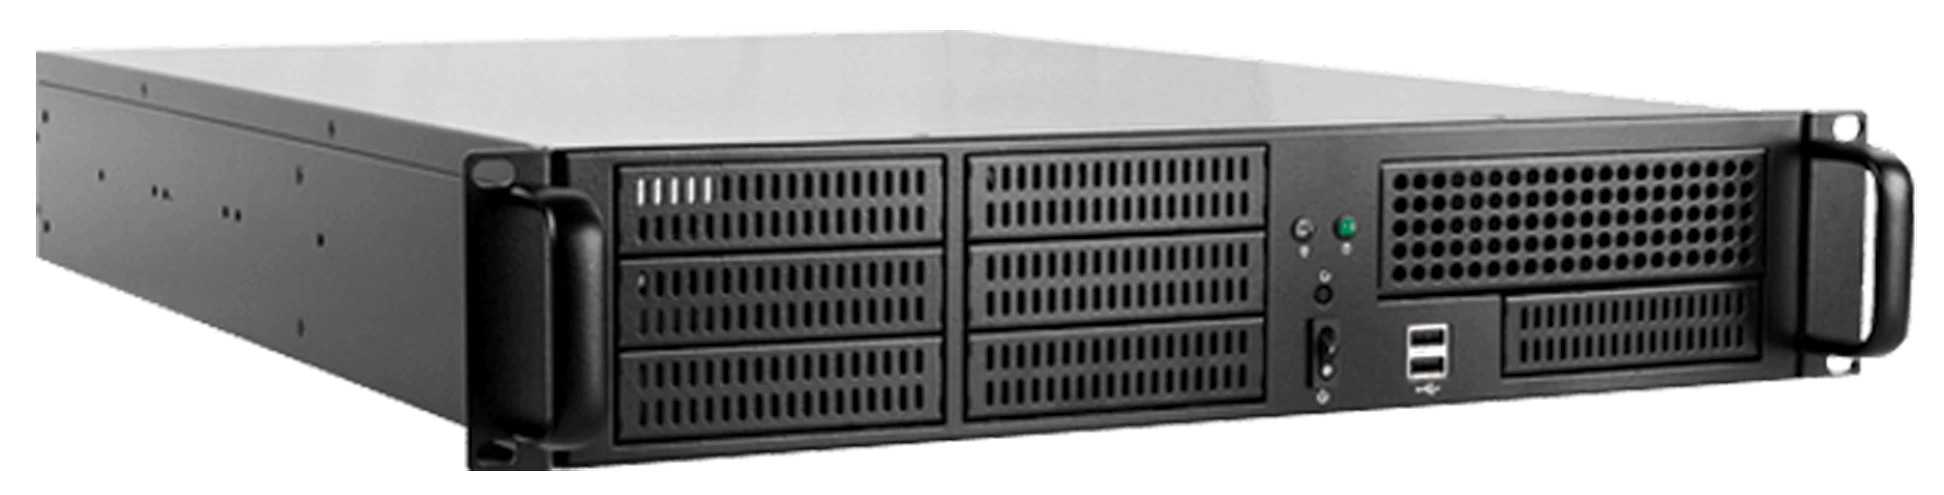 2000-video-wall-server-product-image-right-skewv2-17017229166406.png